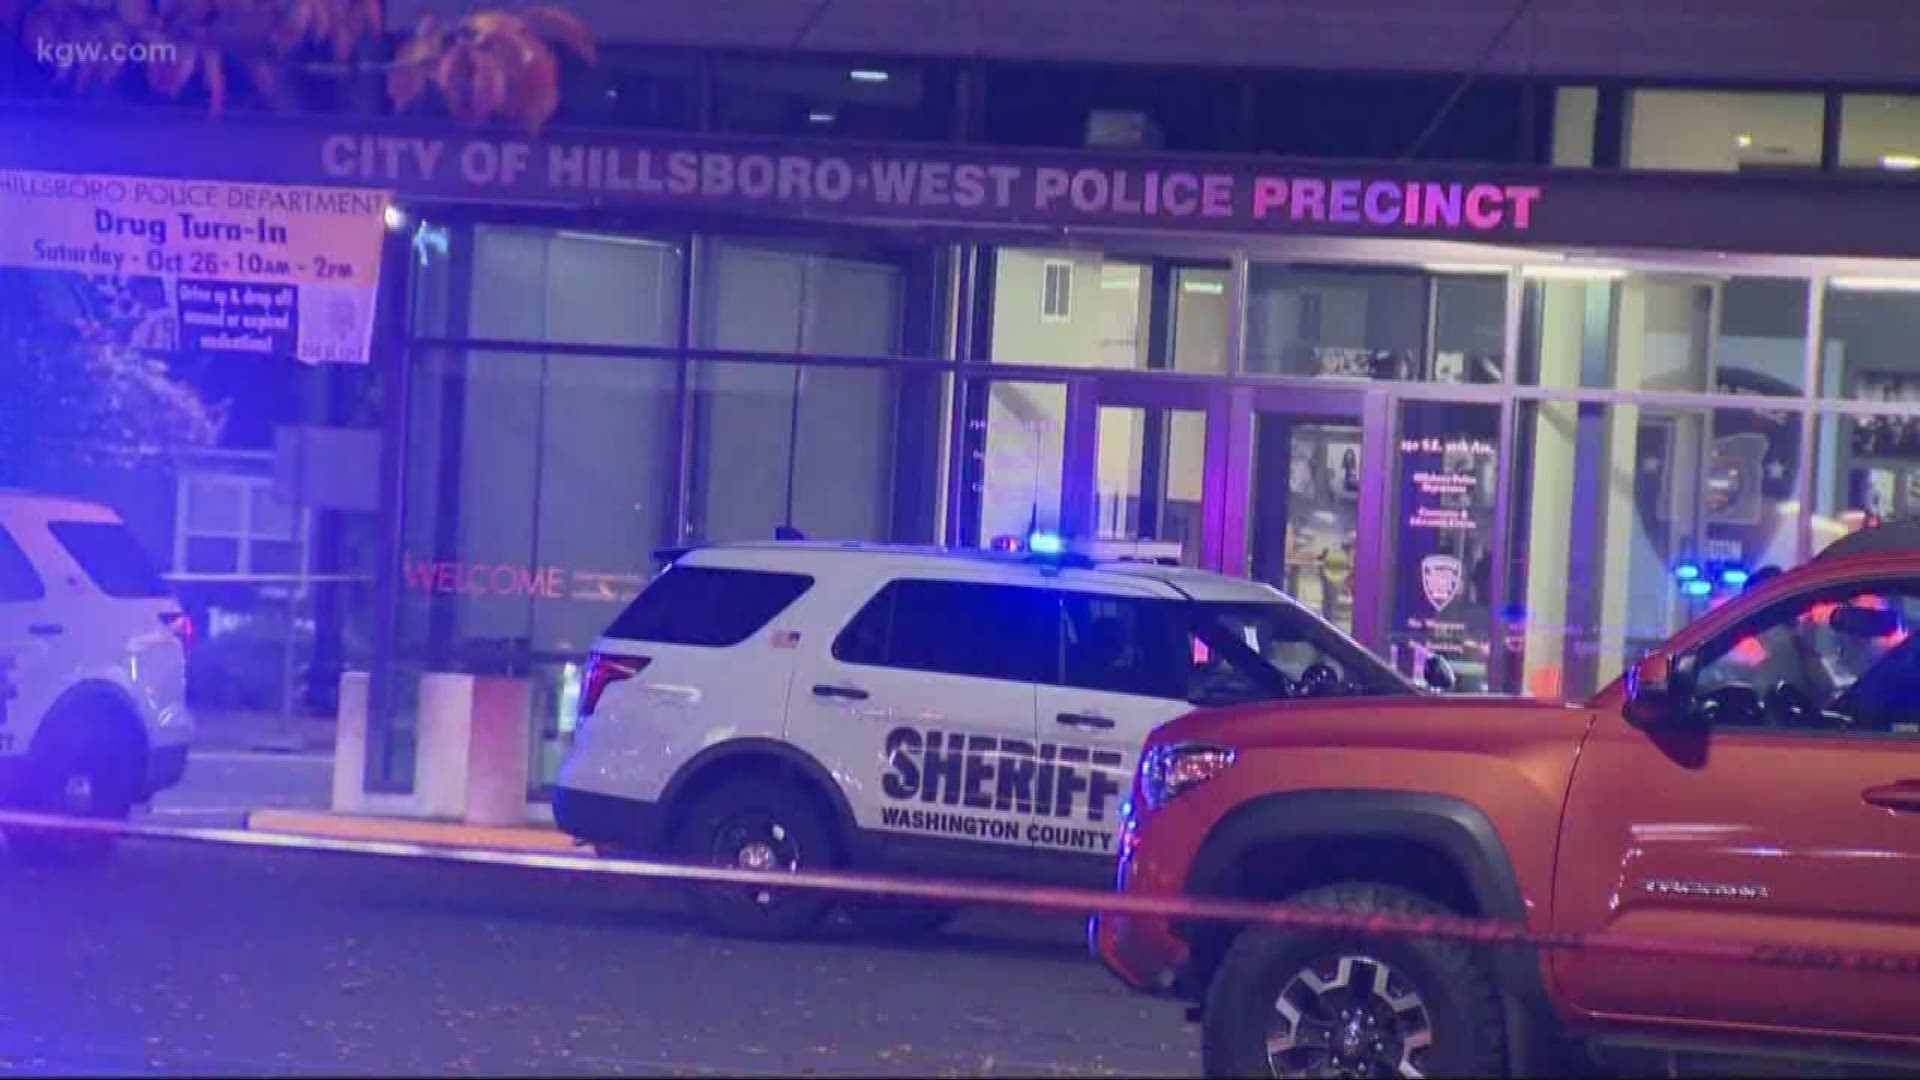 One person is dead in a police shooting outside a police station in Hillsboro. The person was shot dead during an encounter with officers, police said.